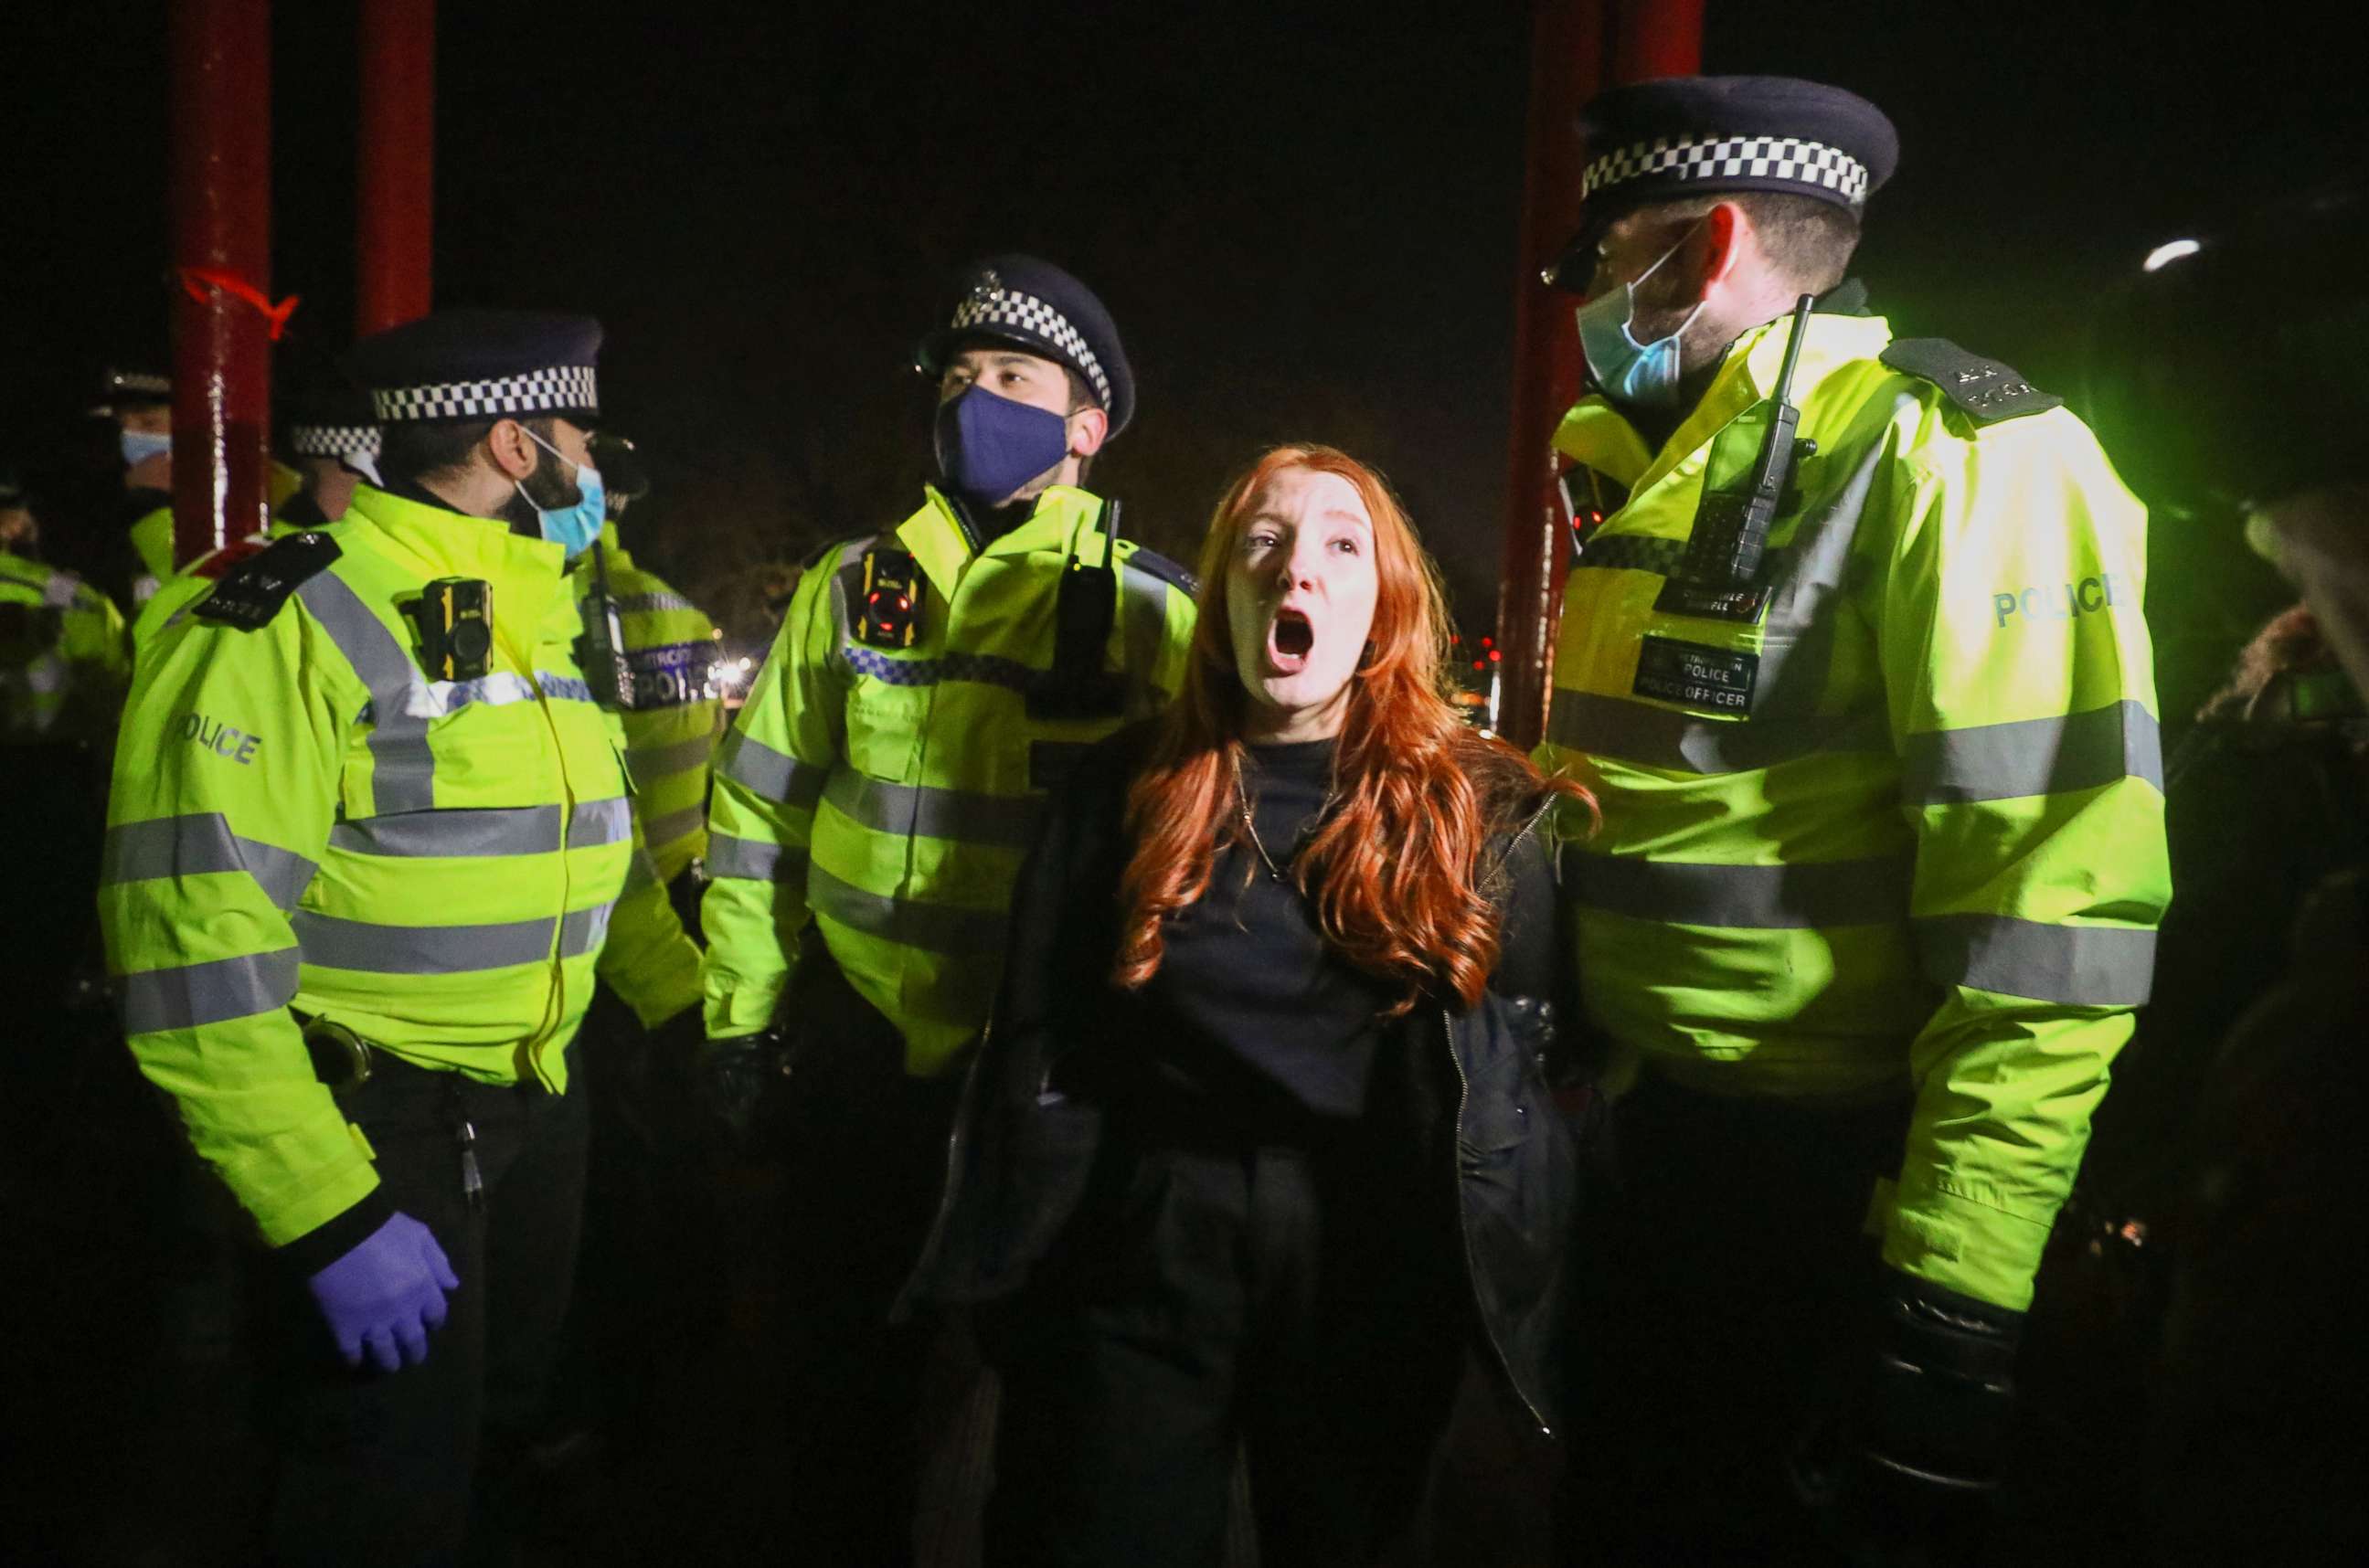 PHOTO: Police detain a woman as people gather at a memorial site in Clapham Common Bandstand, following the kidnap and murder of Sarah Everard, in London, on March 13, 2021.